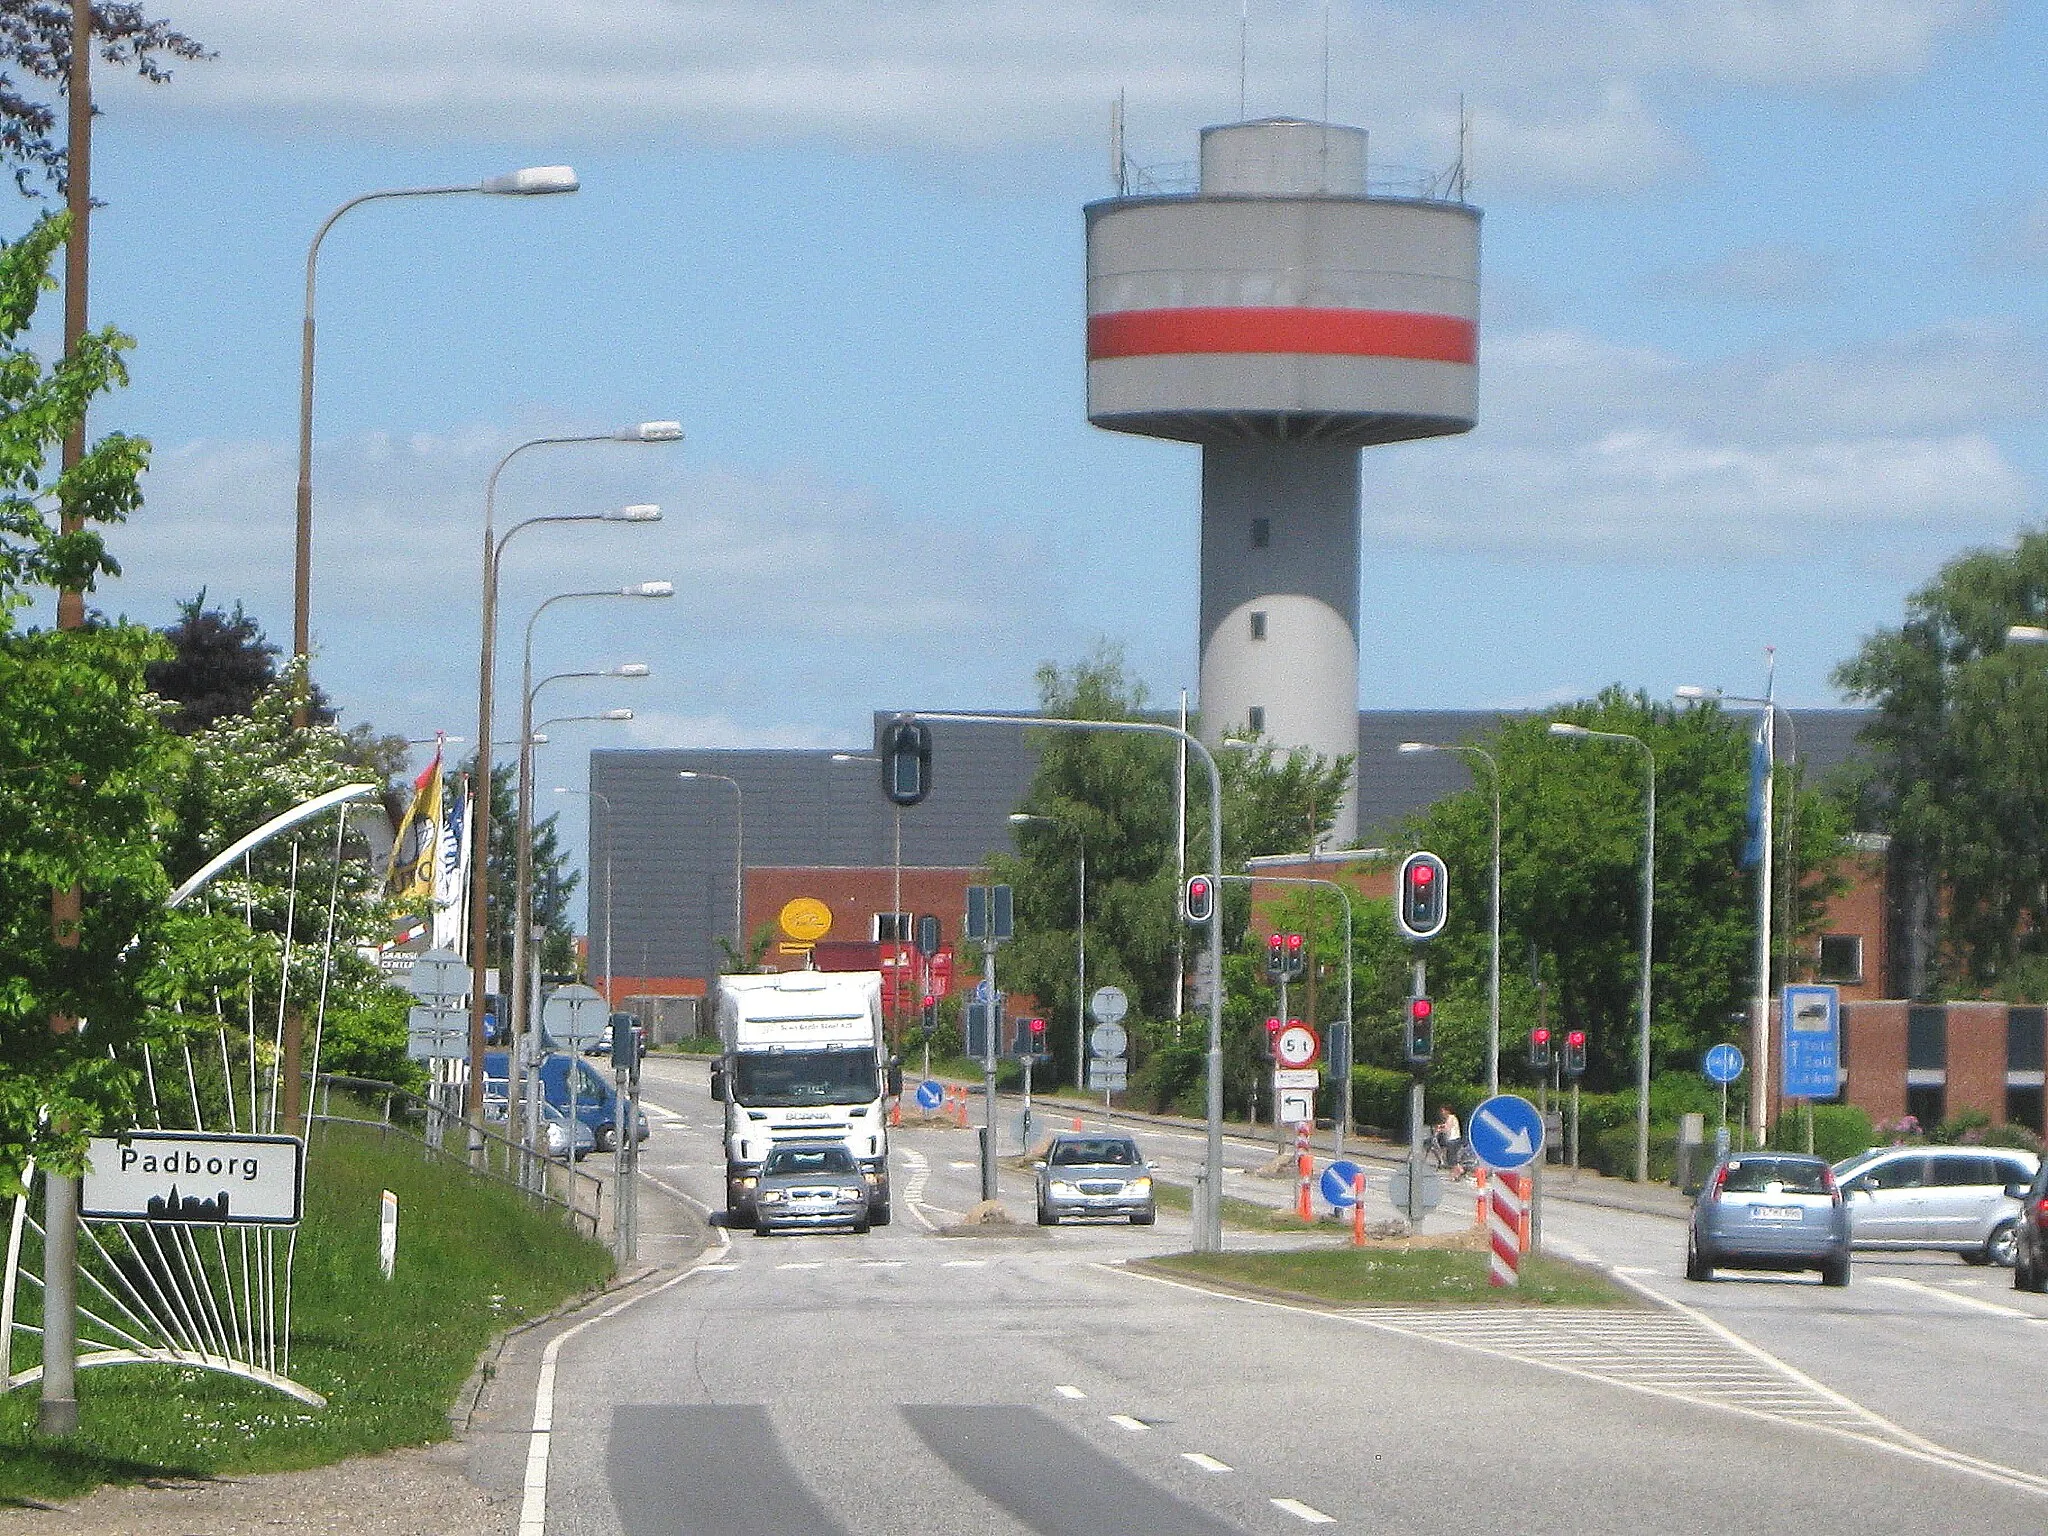 Photo showing: The water tower "Padborg Vandtårn" in the small town "Padborg". The town is located in Southern Jutland, Denmark, close to the German border.